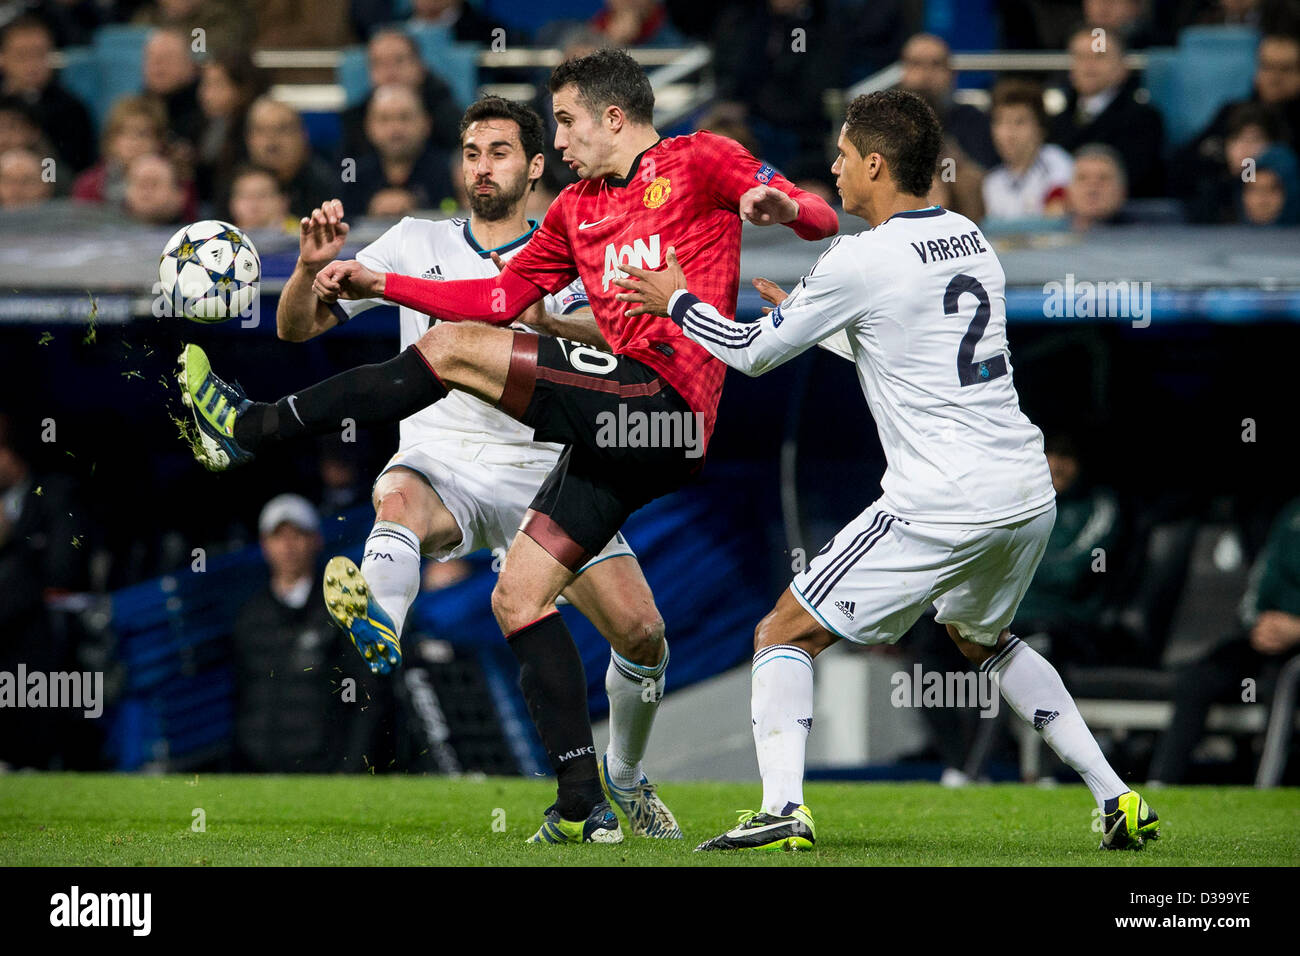 Madrid, Spain. 13th February 2013.   Forward Robin van Persie of Manchester United is  challenged by Defender Alvaro Arbeloa of Real Madrid (L) and Defender Varane of Real Madrid during the Champions League game between Real Madrid and Manchester United Saint Germain from the Mestalla Stadium. Credit:  Action Plus Sports Images / Alamy Live News Stock Photo